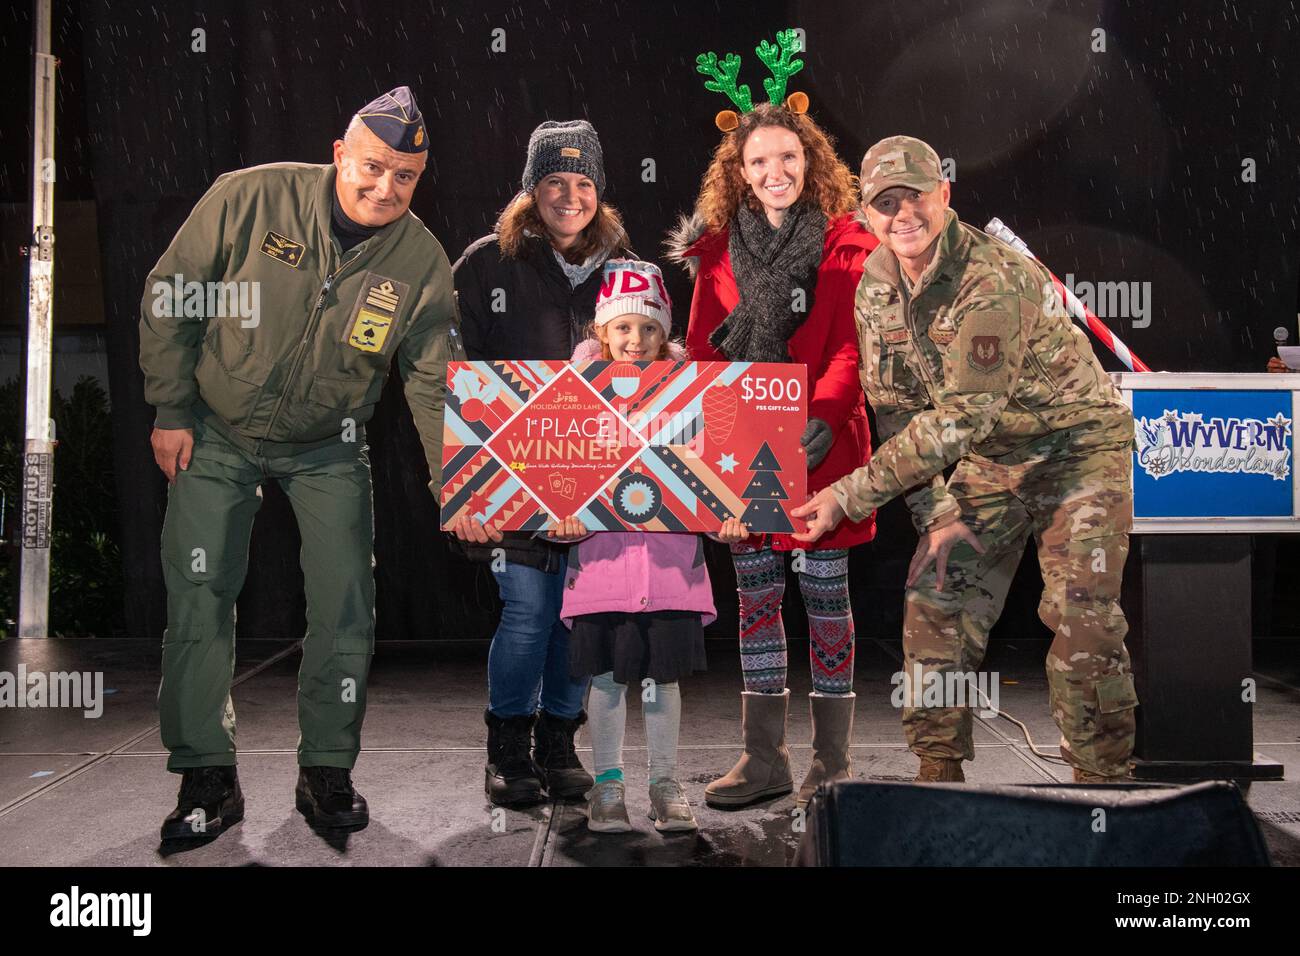 U.S. Air Force Brig. Gen. Tad Clark, 31st Fighter Wing commander, far right, and Italian Air Force Lt. Col. Riccardo Isoli, operations chief, far left, present the first place for the holiday card decoration contest prize to representatives from the 555th Fighter Squadron, middle, during the Wyvern Wonderland holiday event at Aviano Air Base, December 2, 2022. Wyvern Wonderland provided a host of events and activities to help families connect with each other and thrive during their time in Italy. Stock Photo